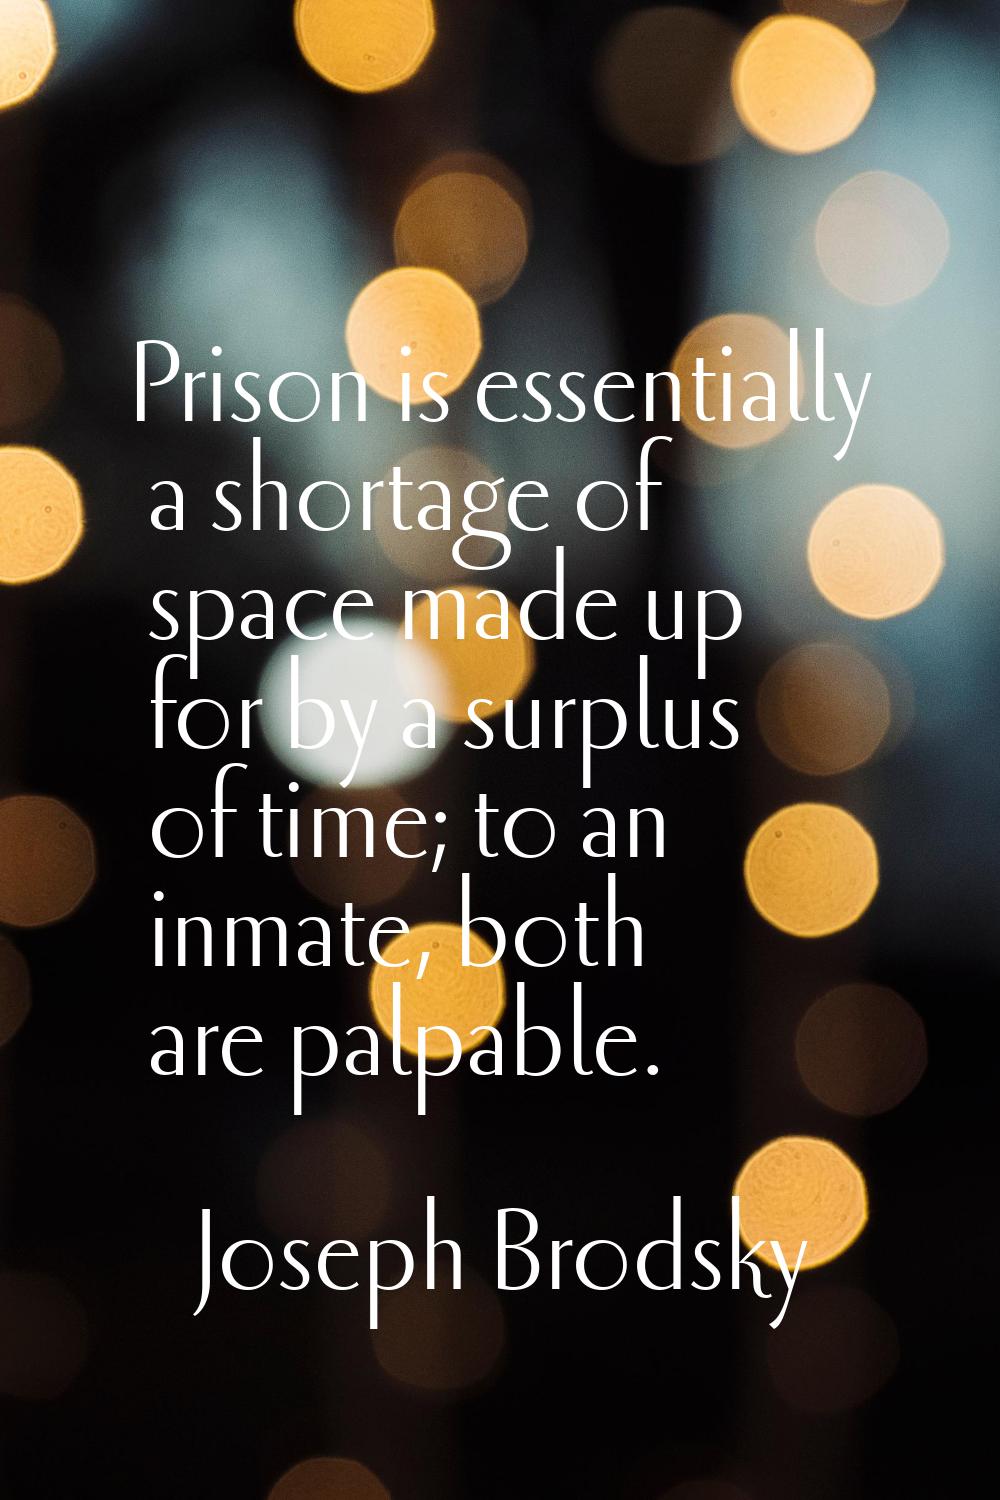 Prison is essentially a shortage of space made up for by a surplus of time; to an inmate, both are 